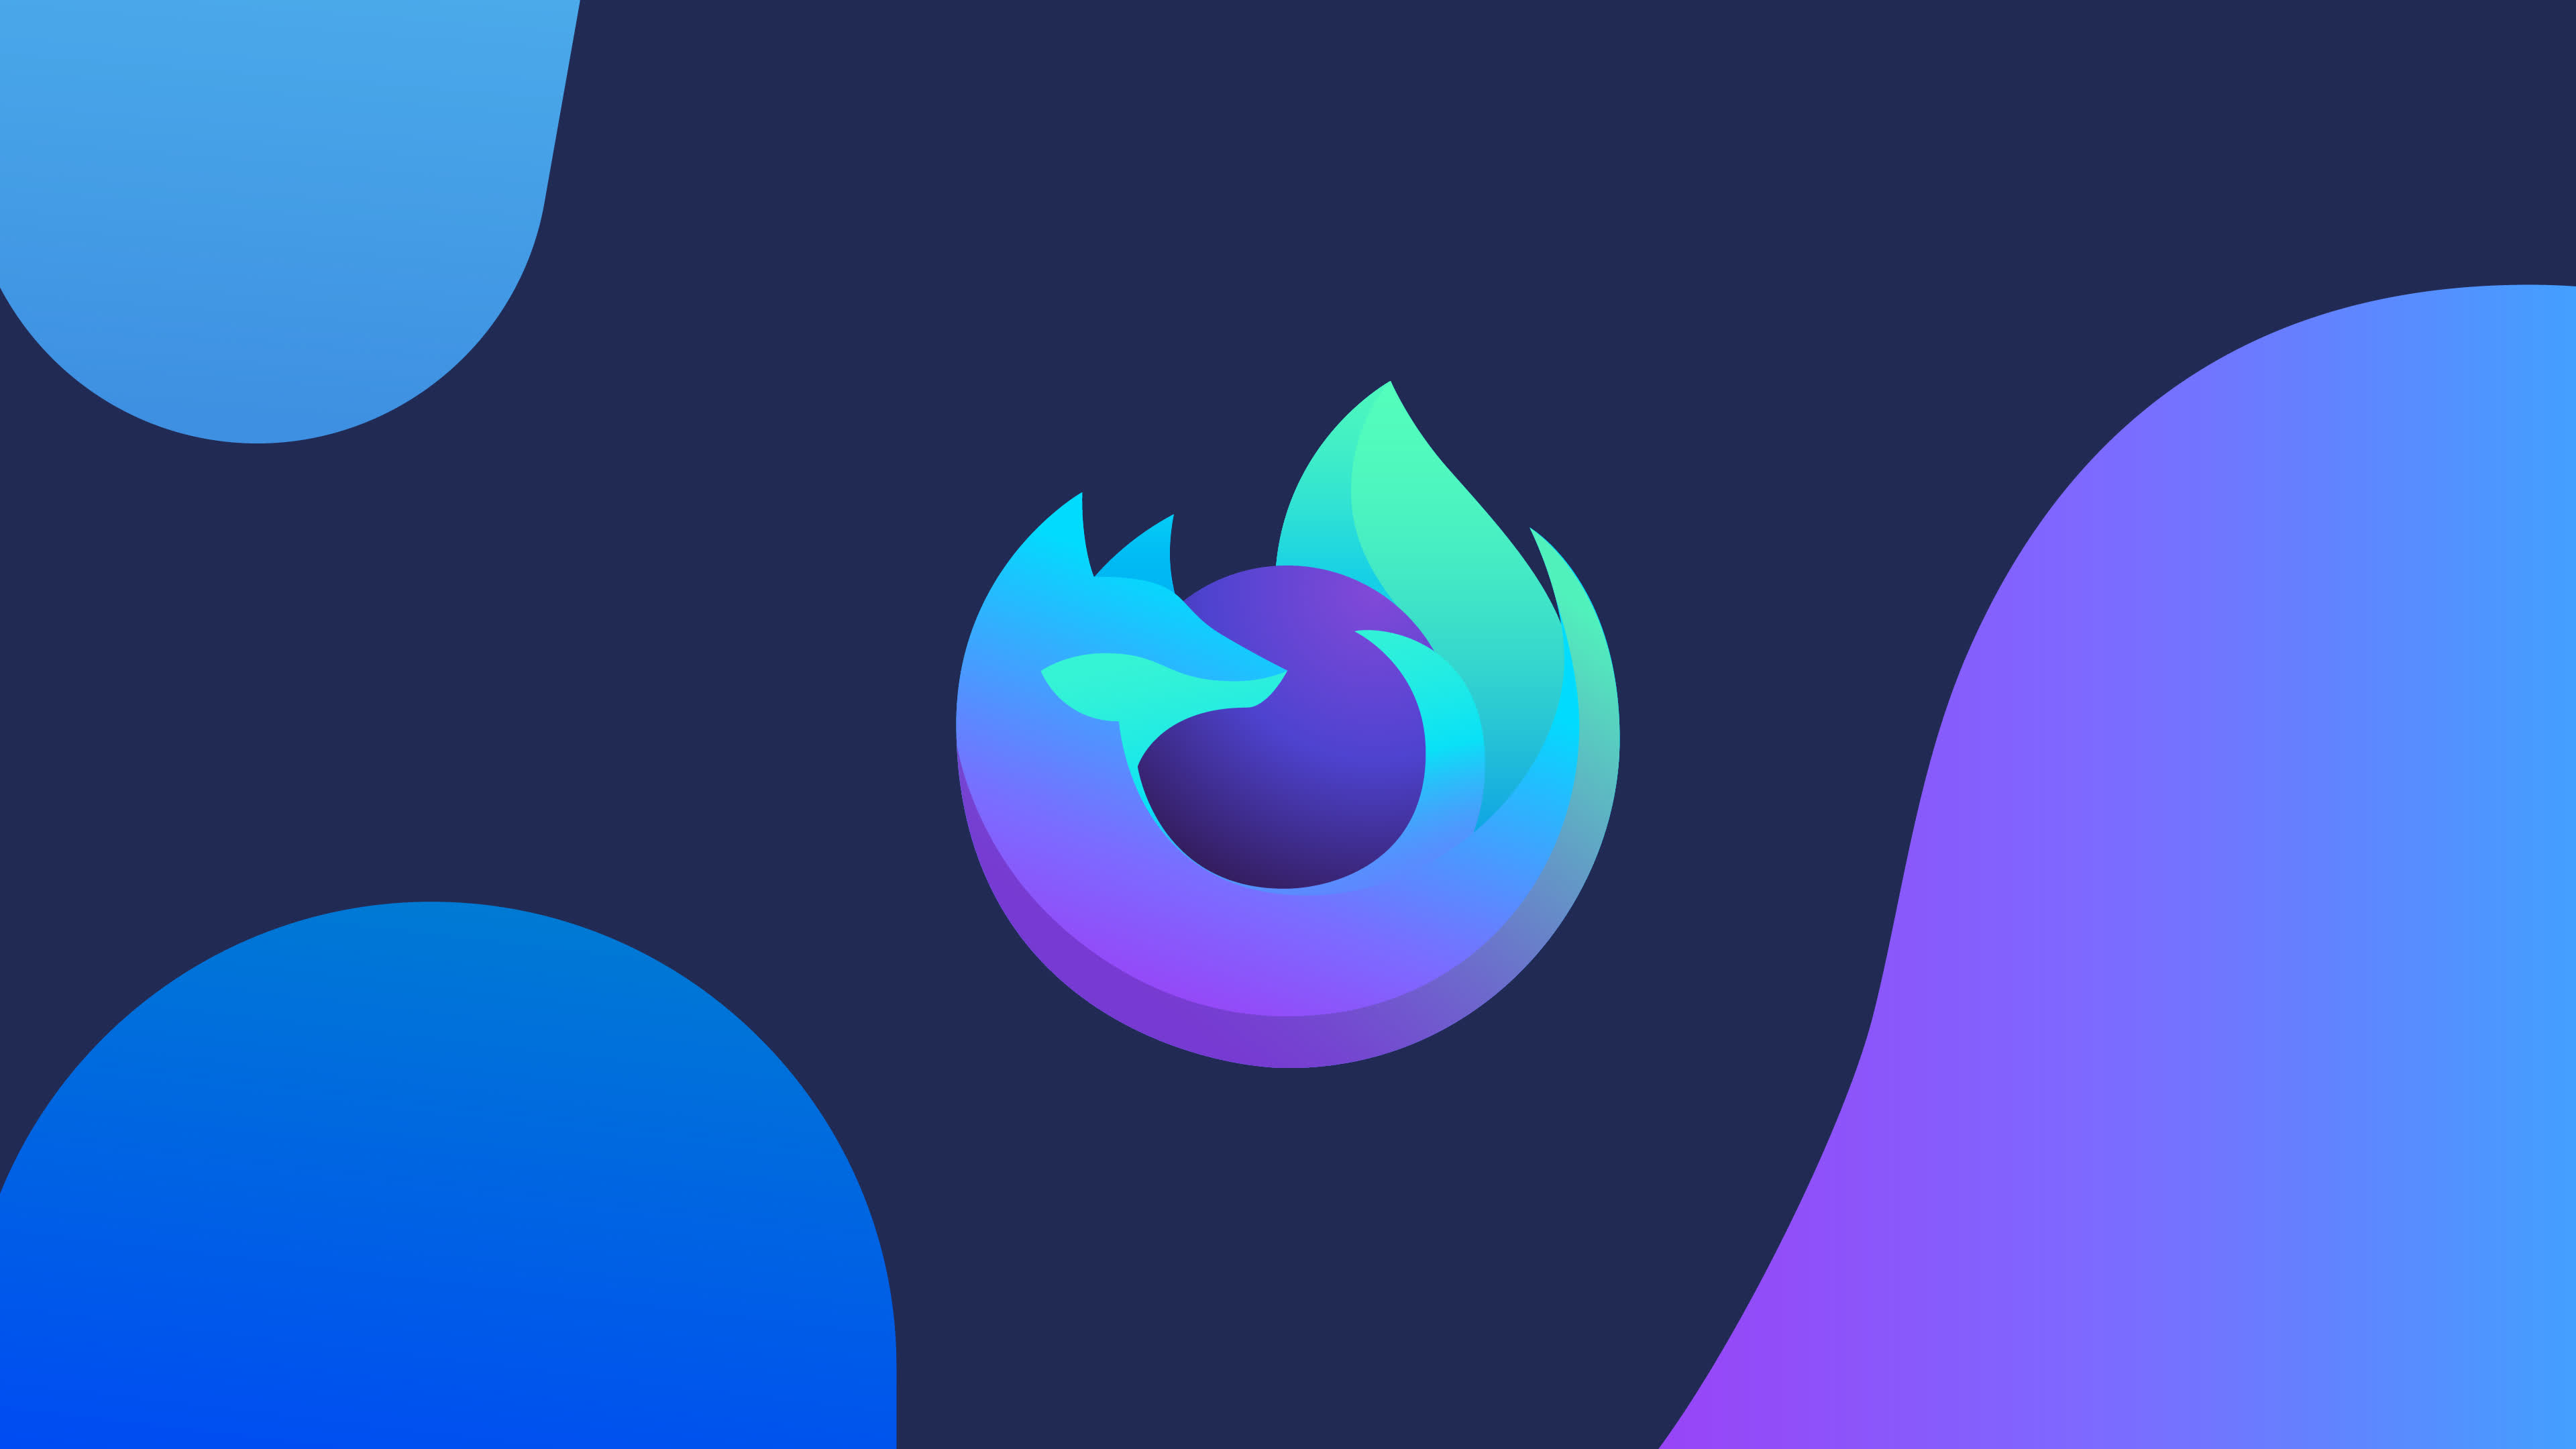 Manifest v3 extensions are now accepted on the Firefox add-on store